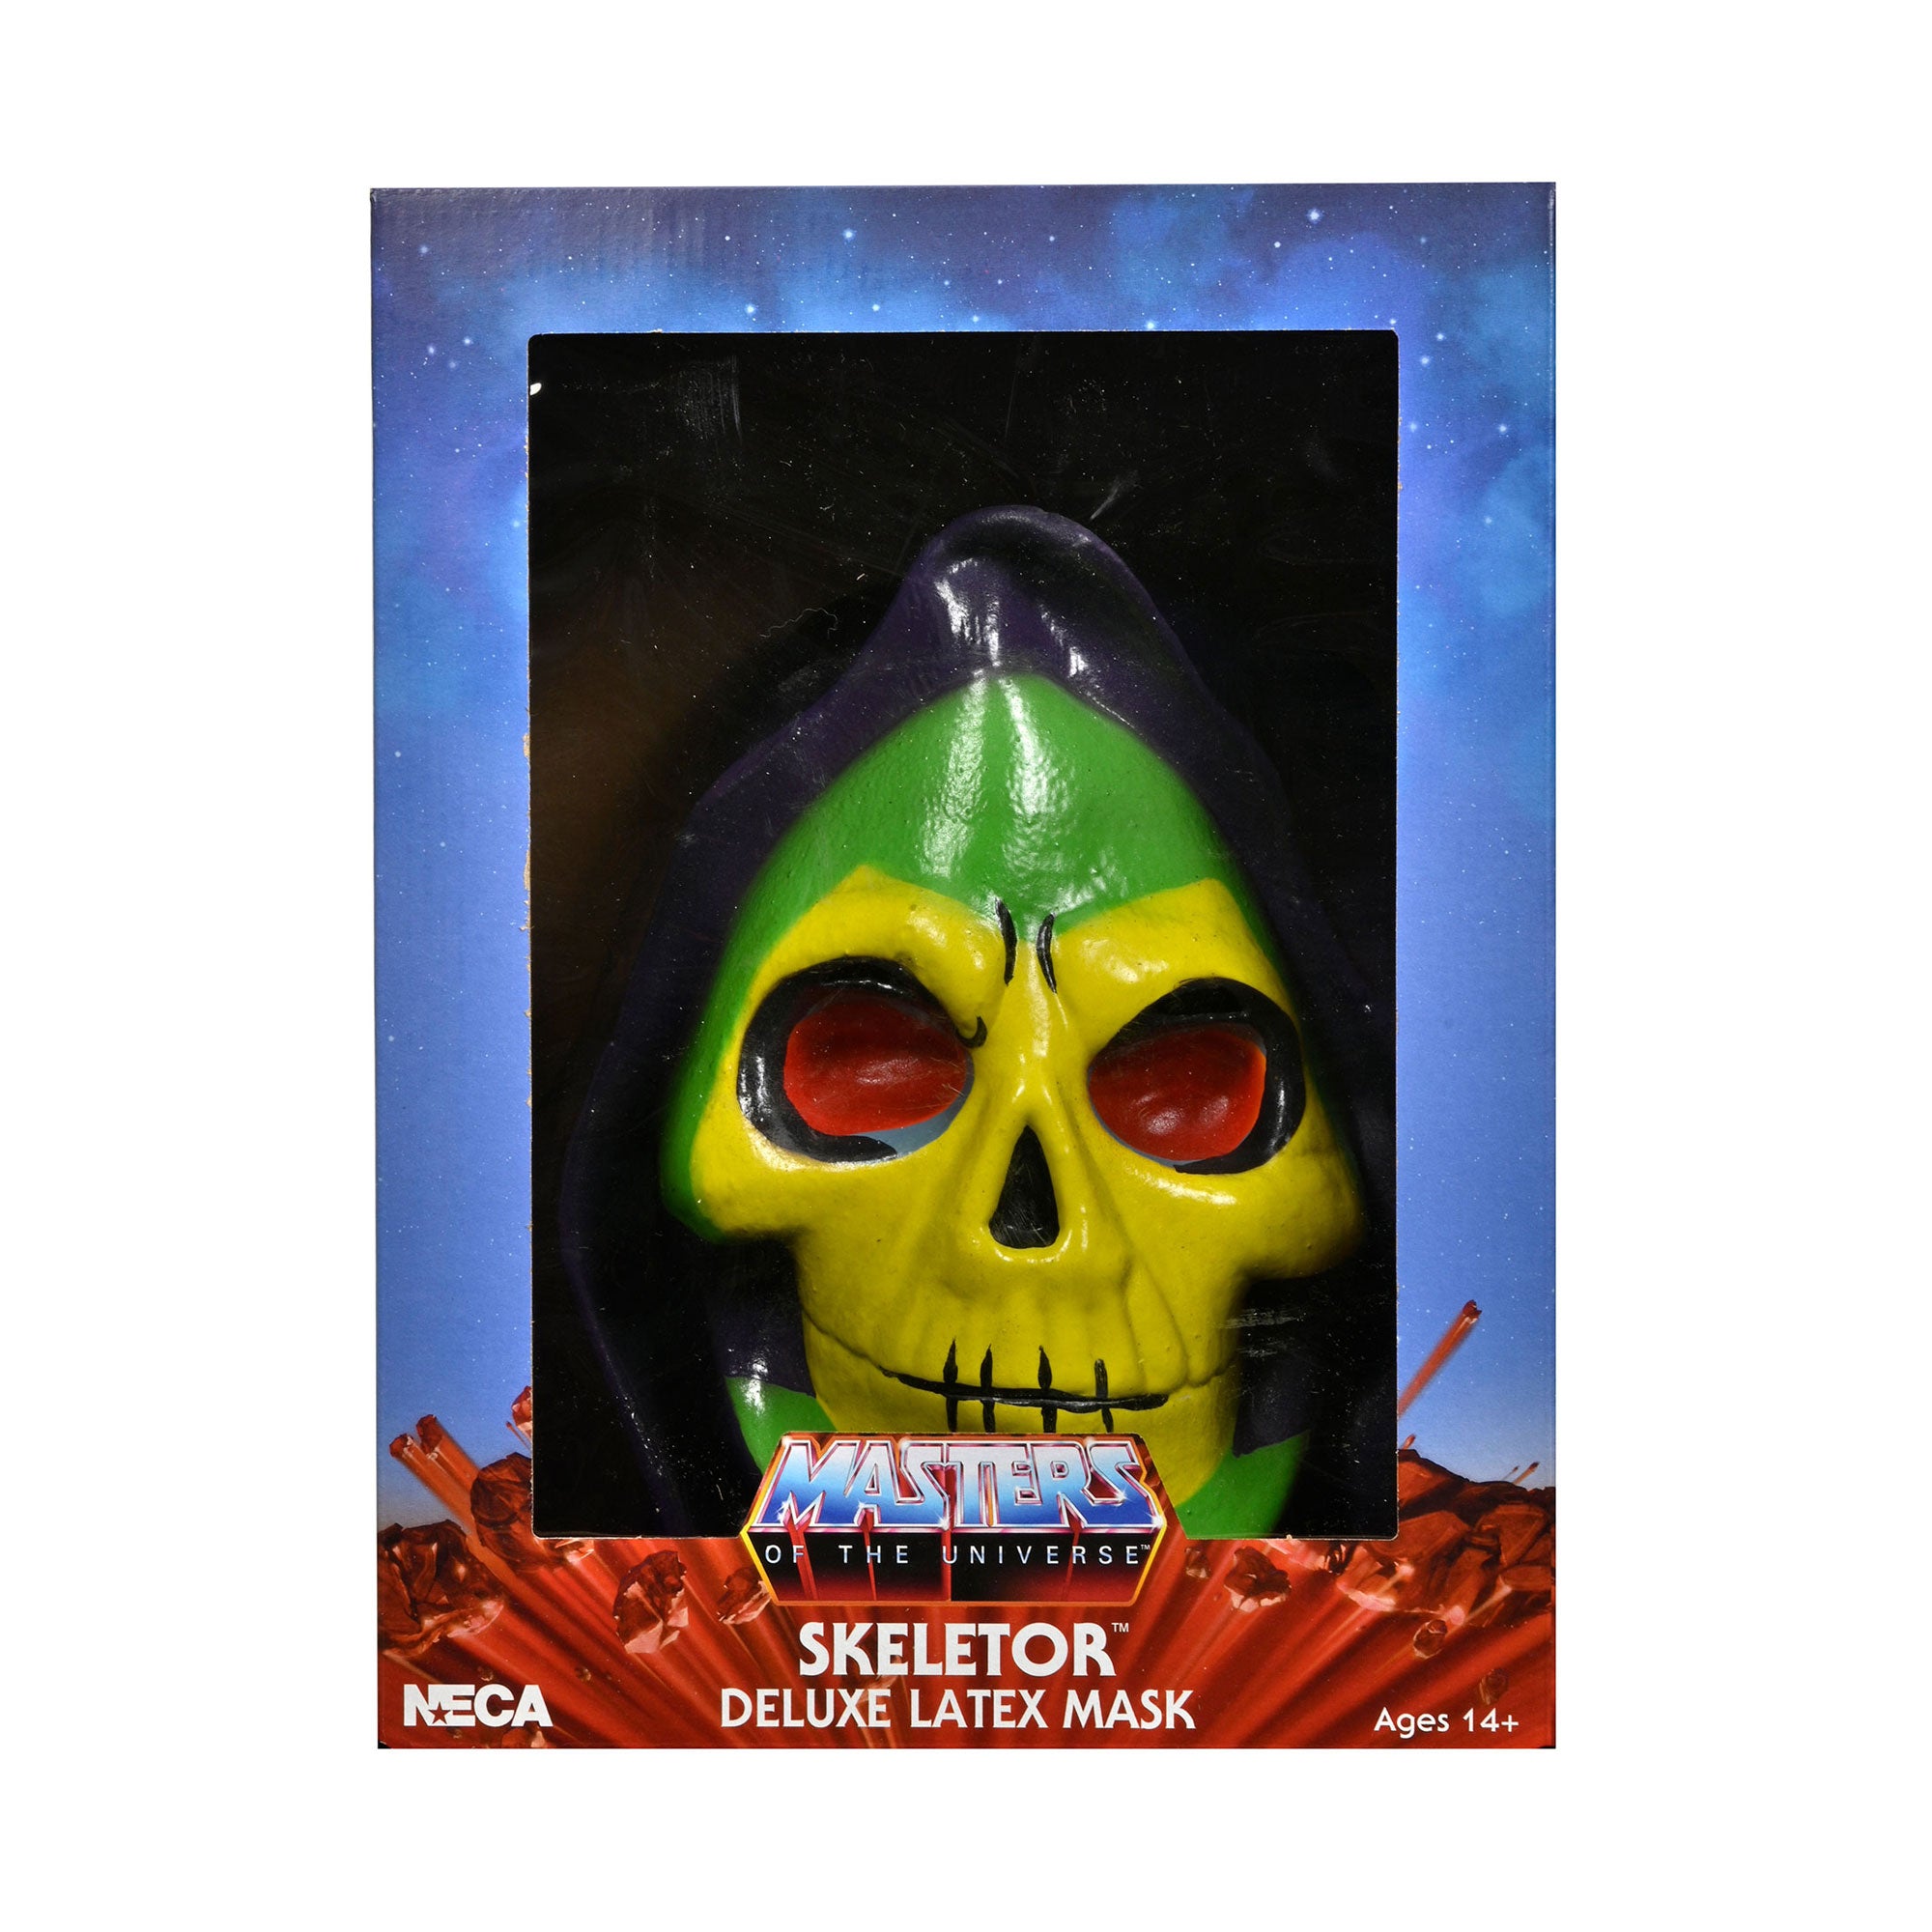 Masters of the Universe Skeletor Deluxe Latex Mask Packaging - Front of Box